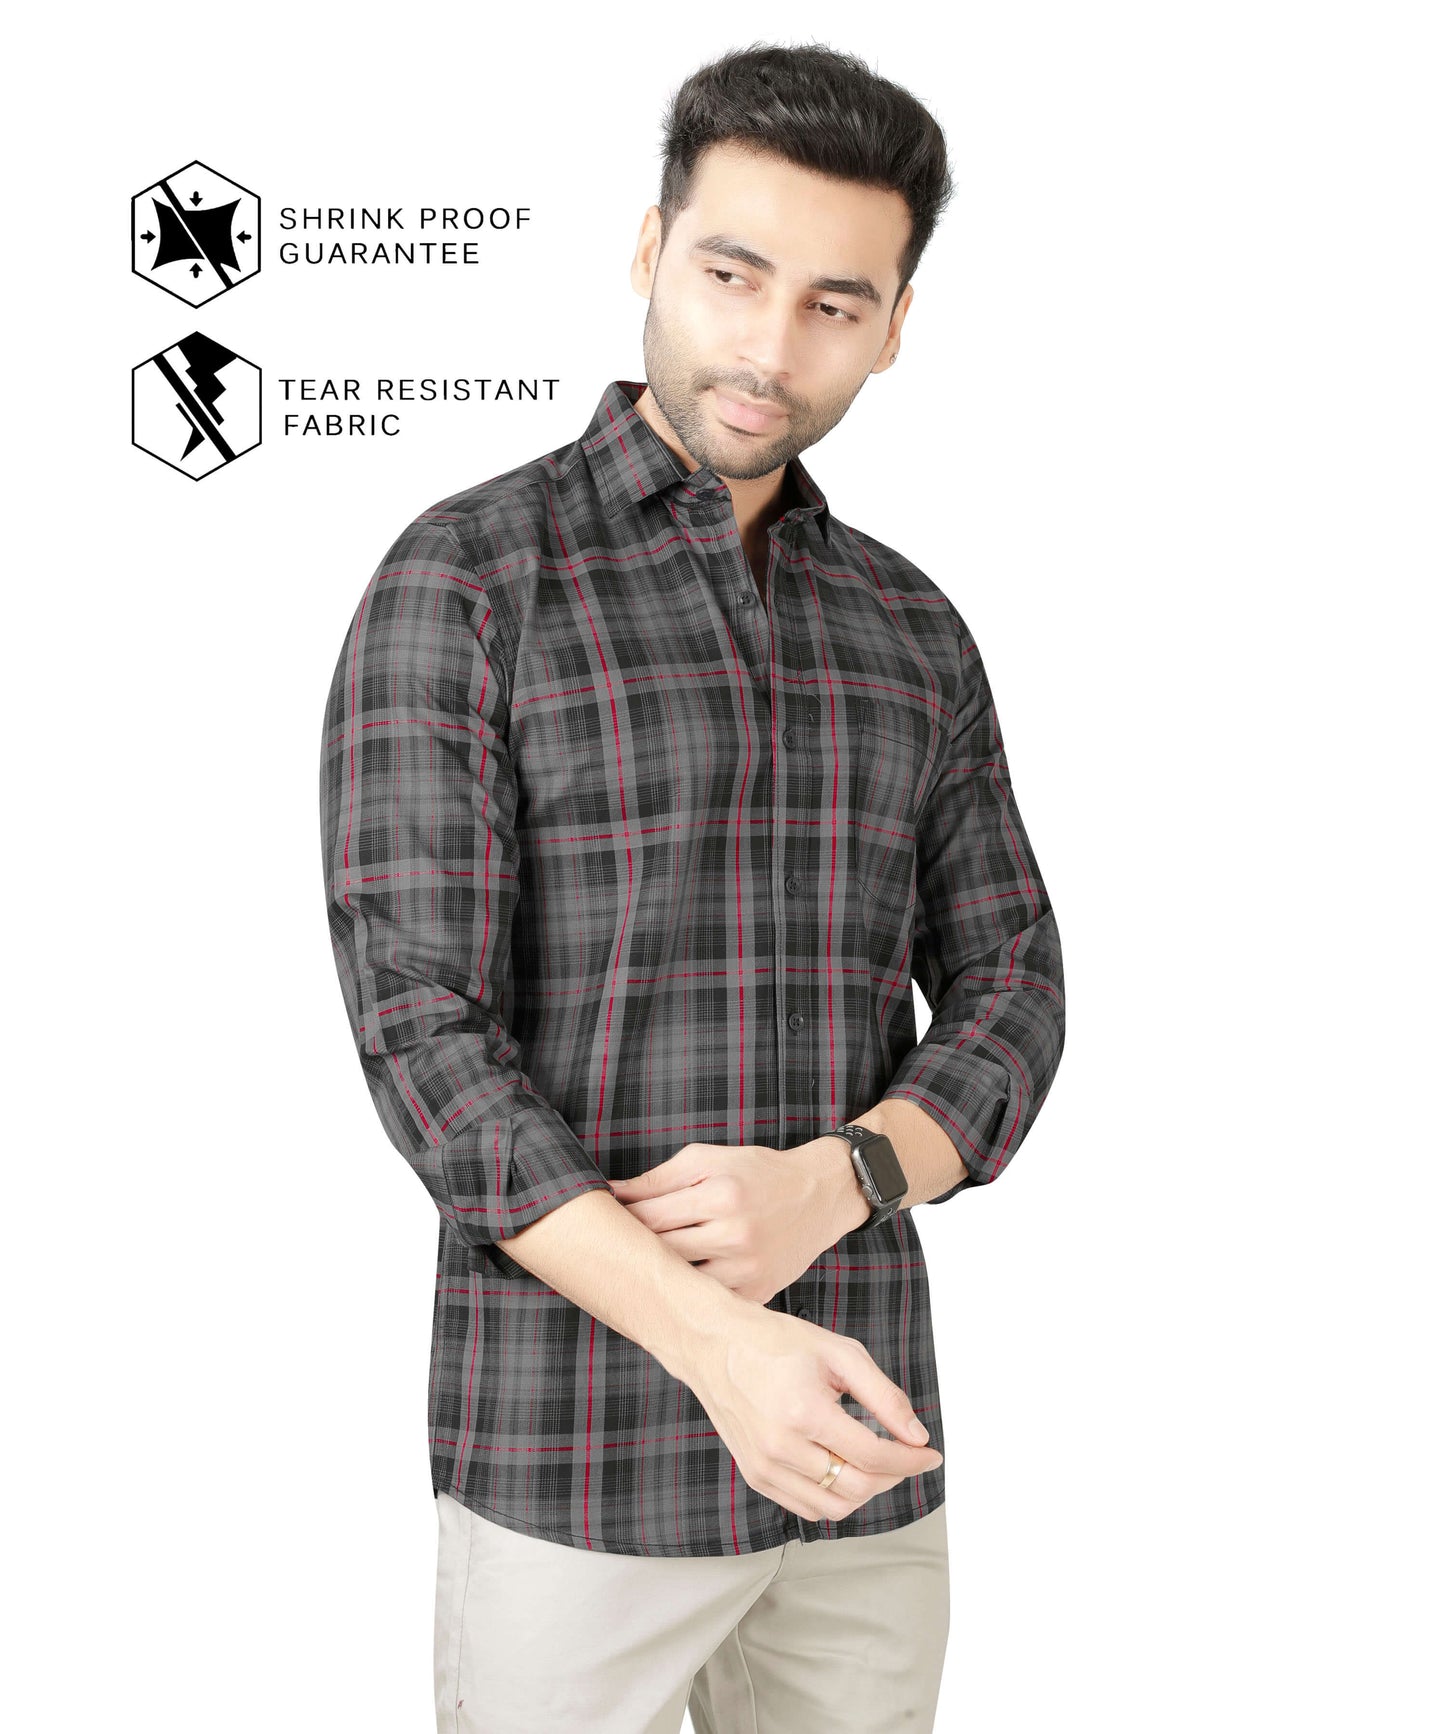 5thanfold Men's Casual Pure Cotton Full Sleeve Checkered Grey Slim Fit Shirt